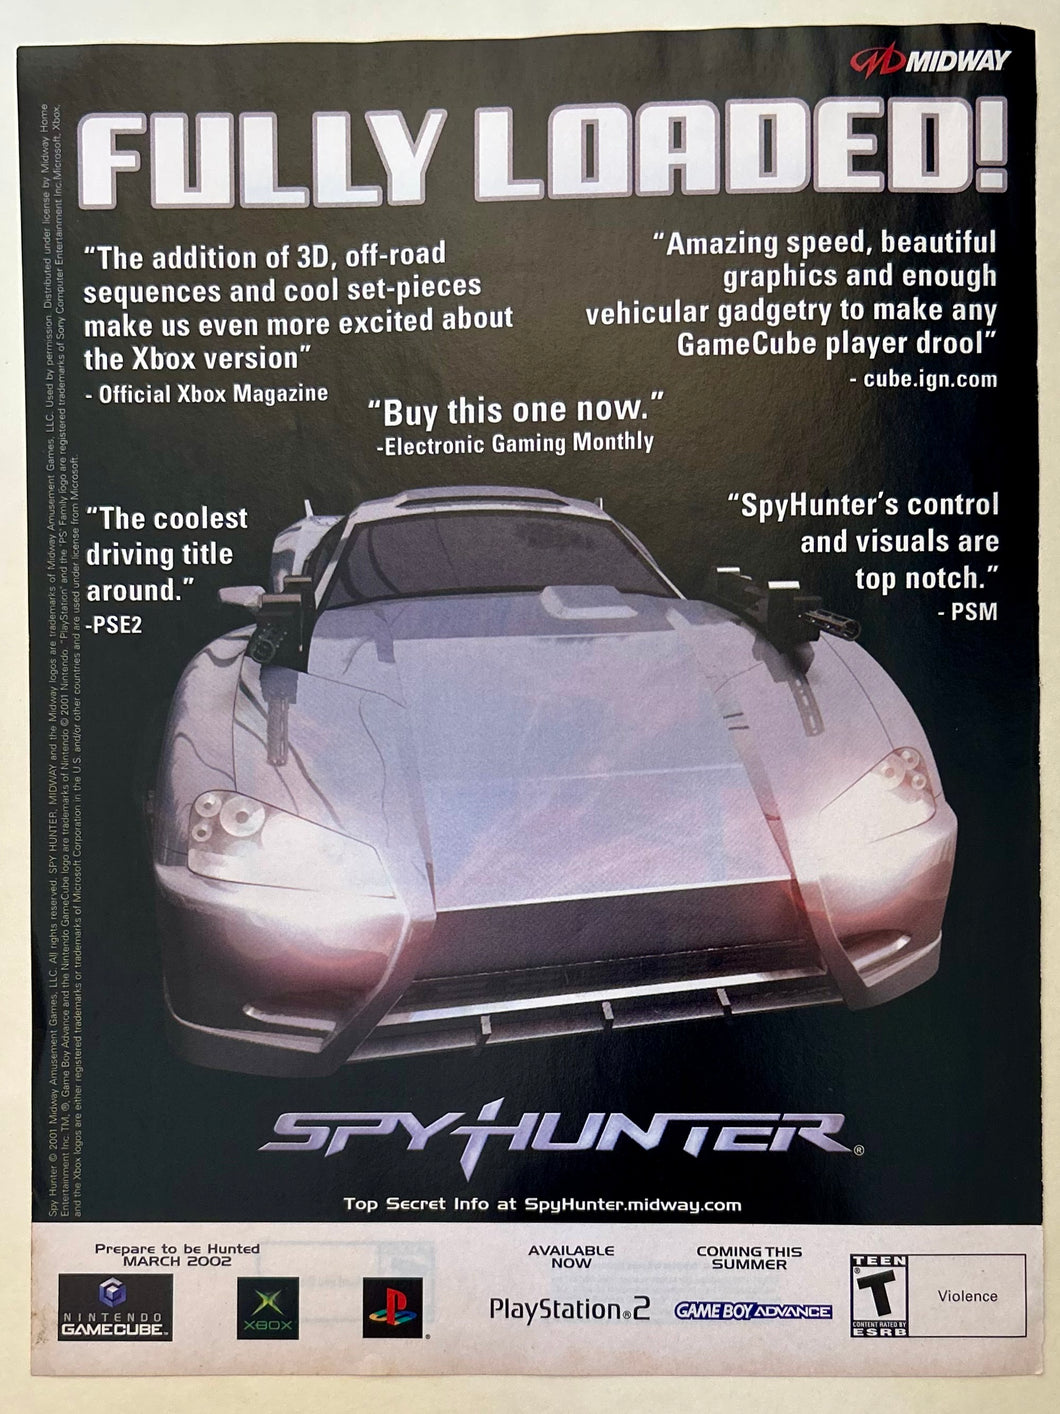 Spy Hunter - PS2 Xbox NGC GBA - Original Vintage Advertisement - Print Ads - Laminated A4 Poster